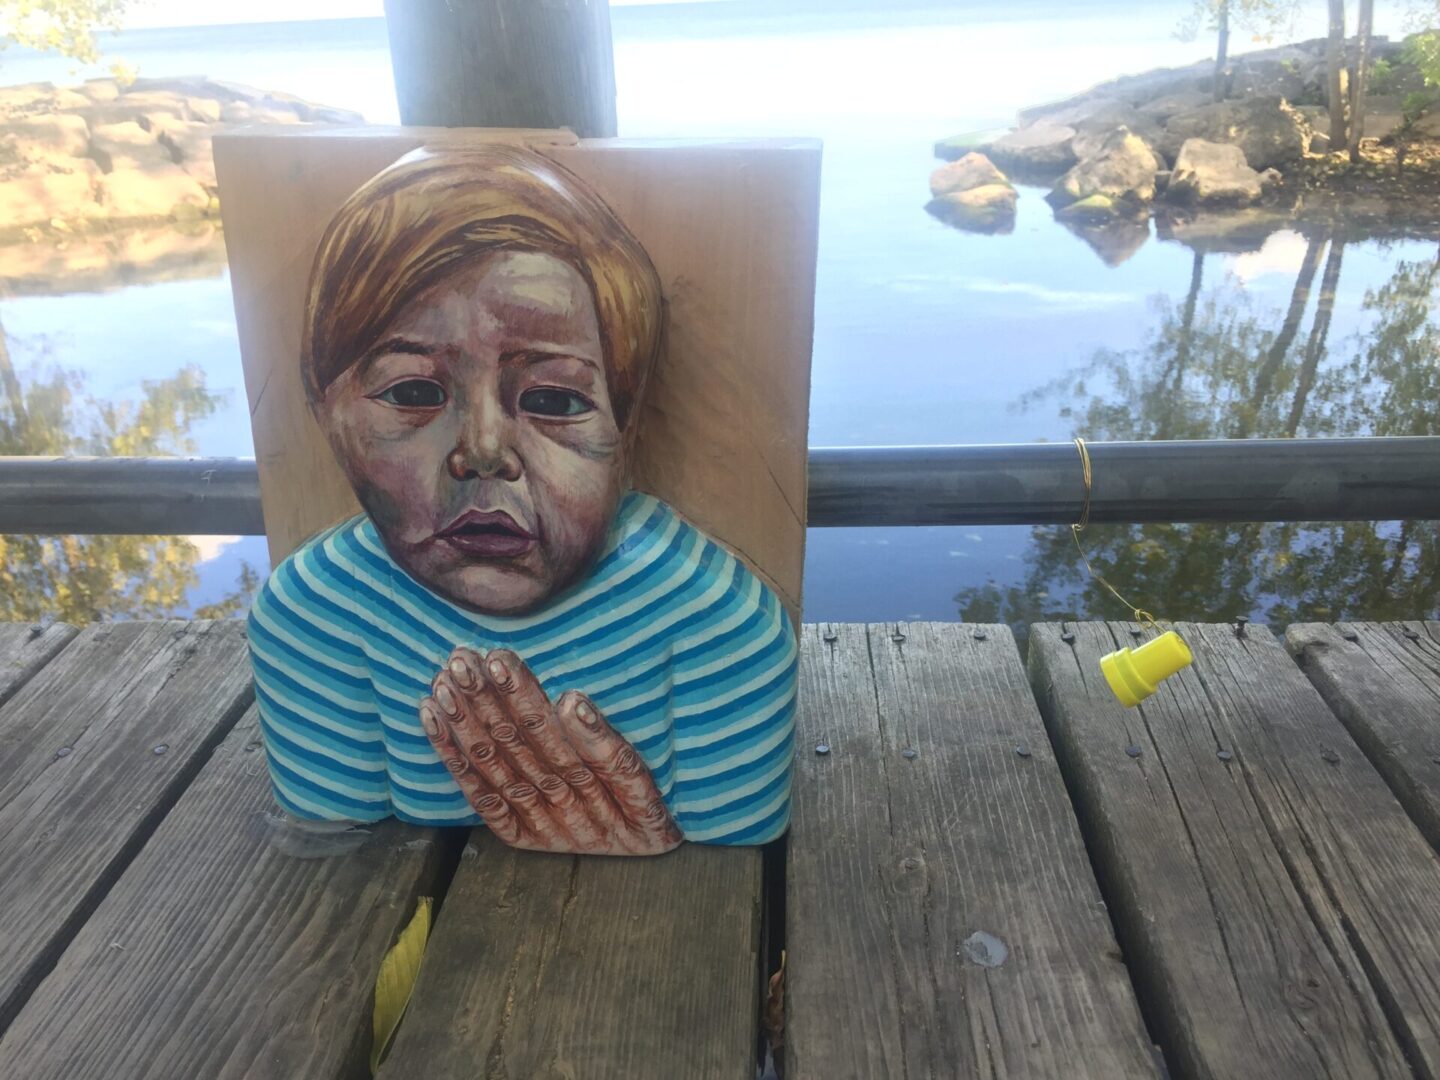 Artist: Troy Lovegates. HIDE N' SEEK
October 2019: Burlington, ON

Public Art Lab 
Sculptural Scavenger Hunt
Sept 27 - Oct 25, 2019
Temporary Public Art Installation

6 sculptures, 1 birdhouse (to hold hand drawn treasure map), stamp for maps , treasures: linoleum hand cut prints for 1st 100

approximately 1'W x 1'Hx 4"D
Acrylic on hand carved sculptures